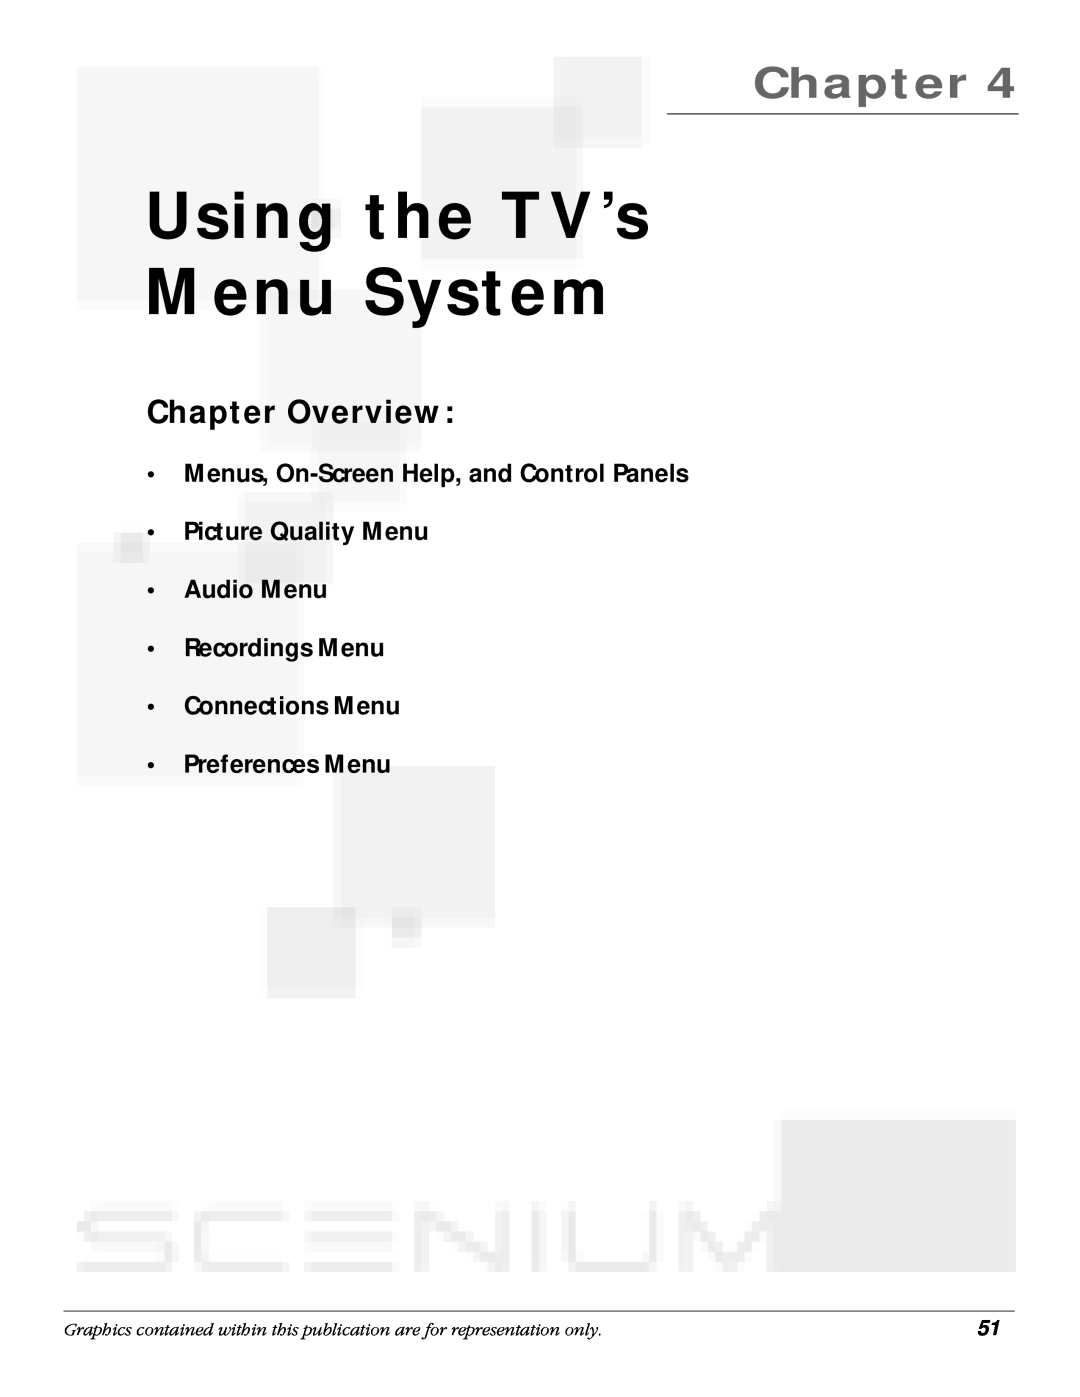 RCA scenium manual Using the TV’s Menu System, Menus, On-Screen Help, and Control Panels Picture Quality Menu, Chapter 